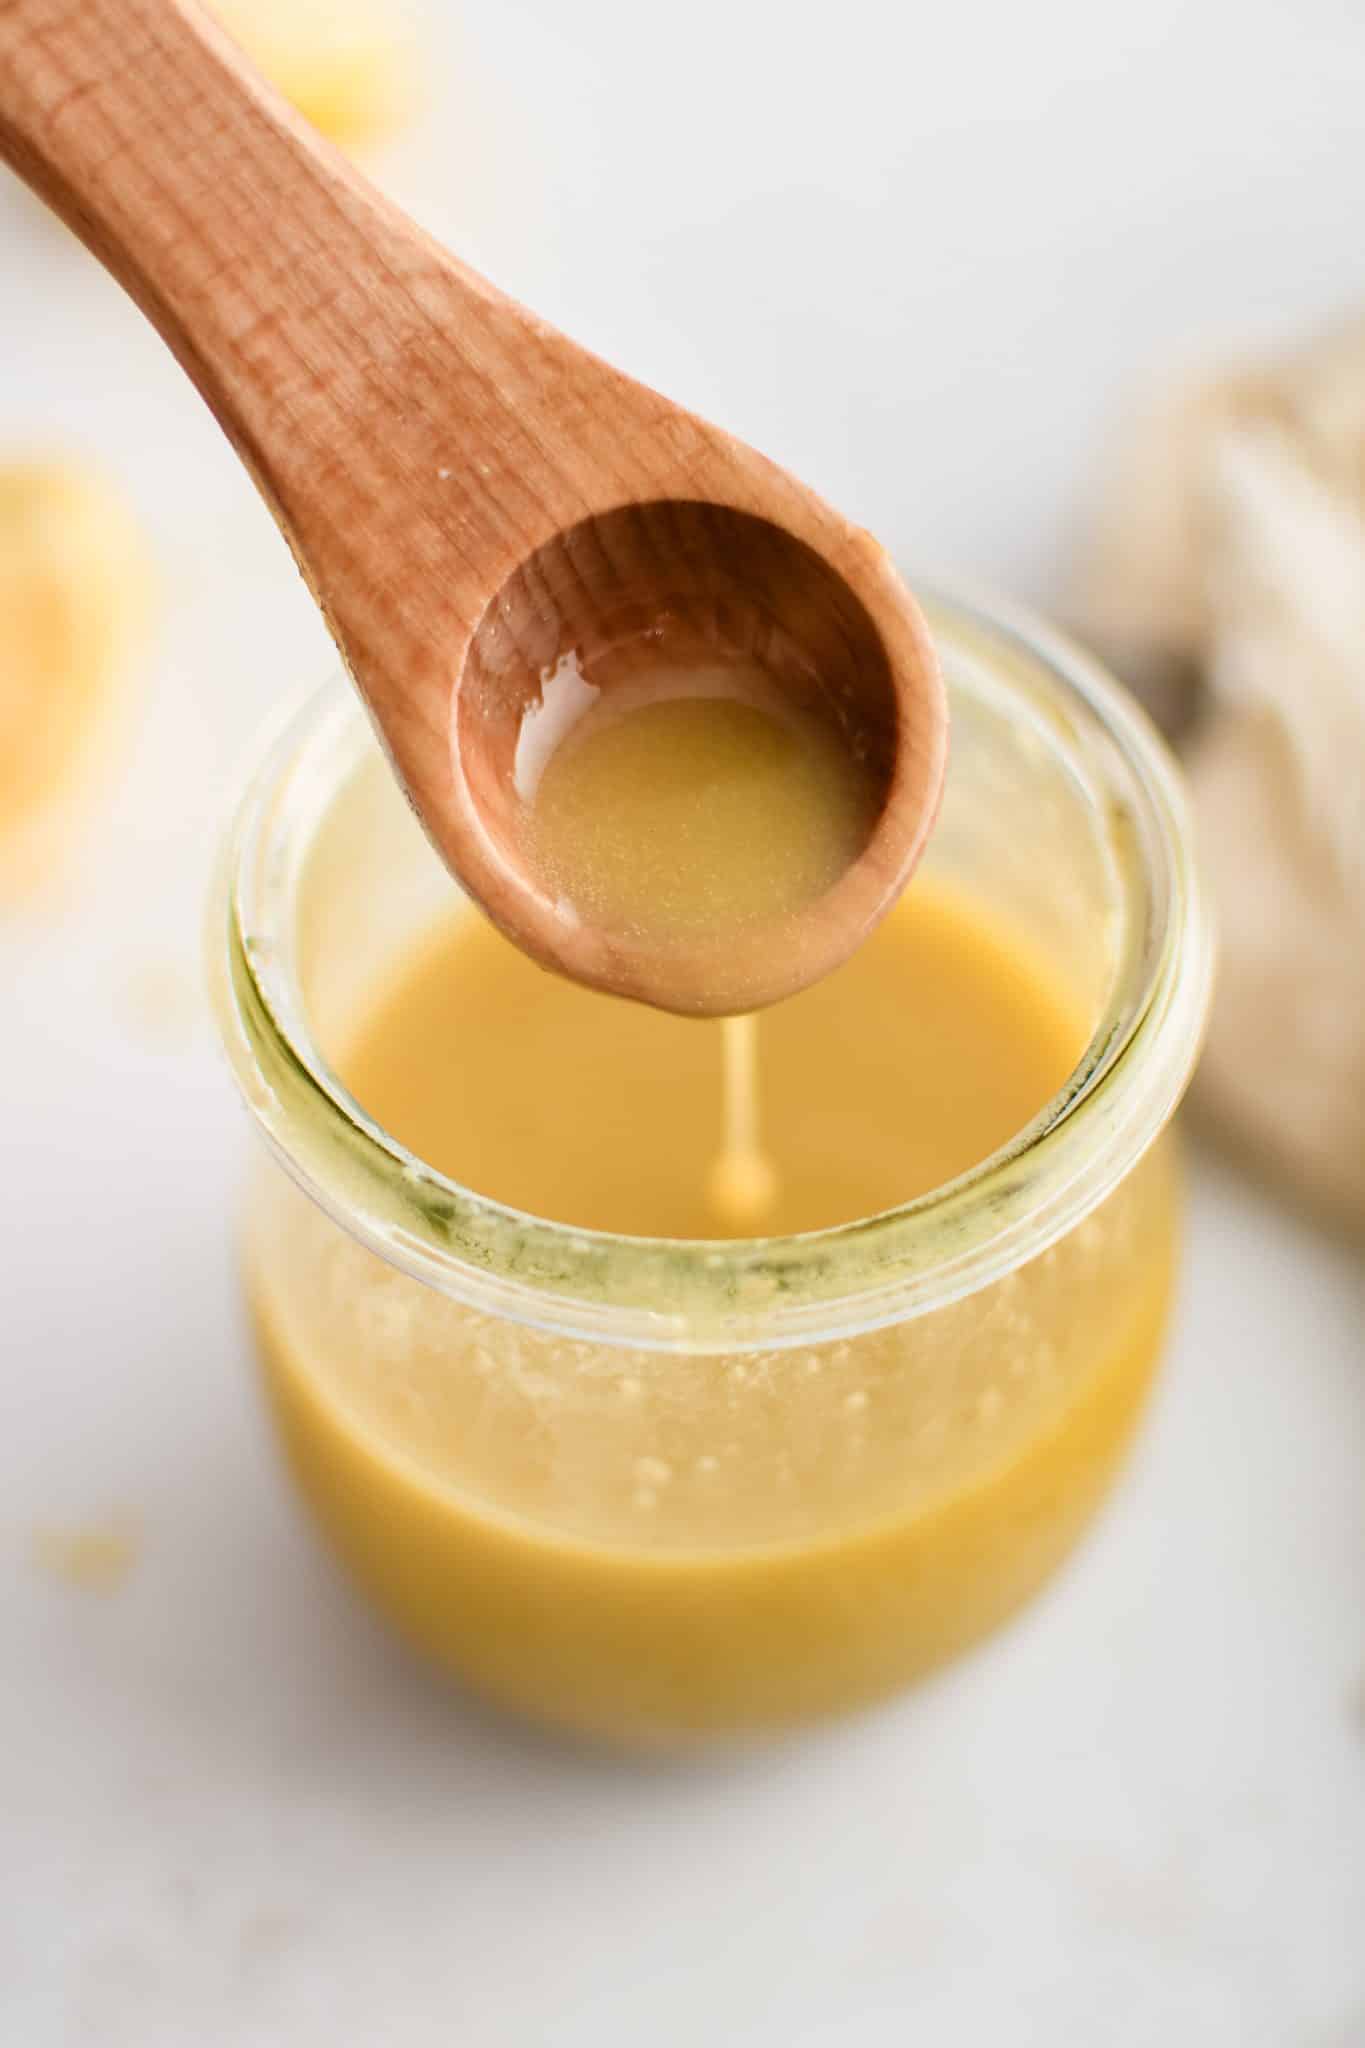 Small wood spoon filled with homemade Dijon vinaigrette hovering over a glass jar filled with vinaigrette.